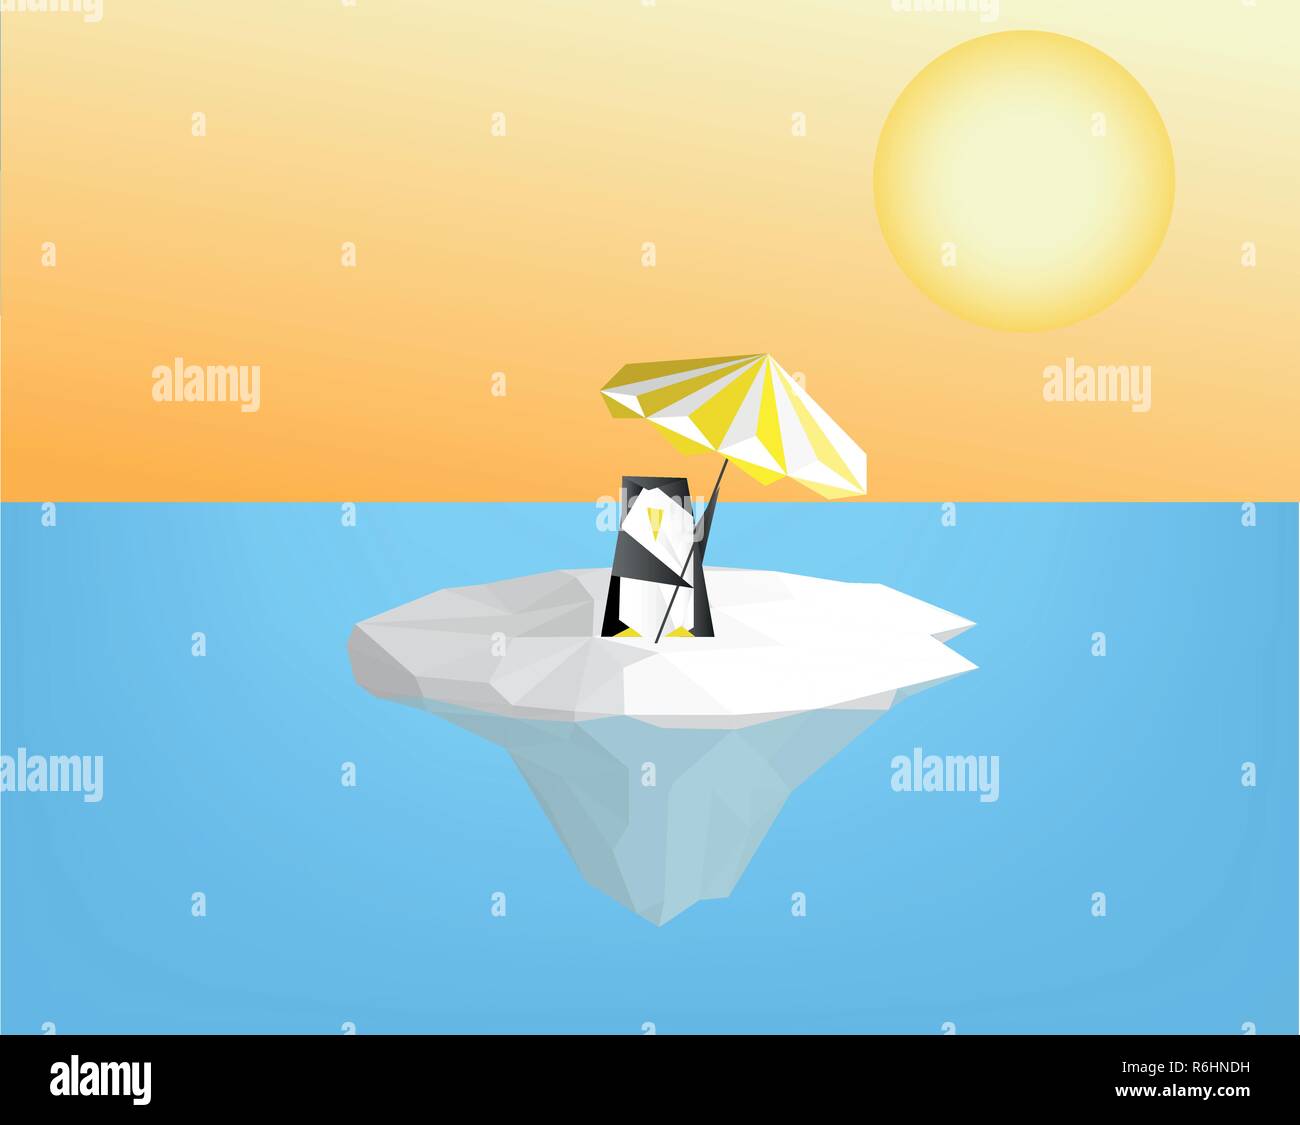 penguin with umbrella on ice floe  - global warming concept vector graphic  illustration Stock Photo